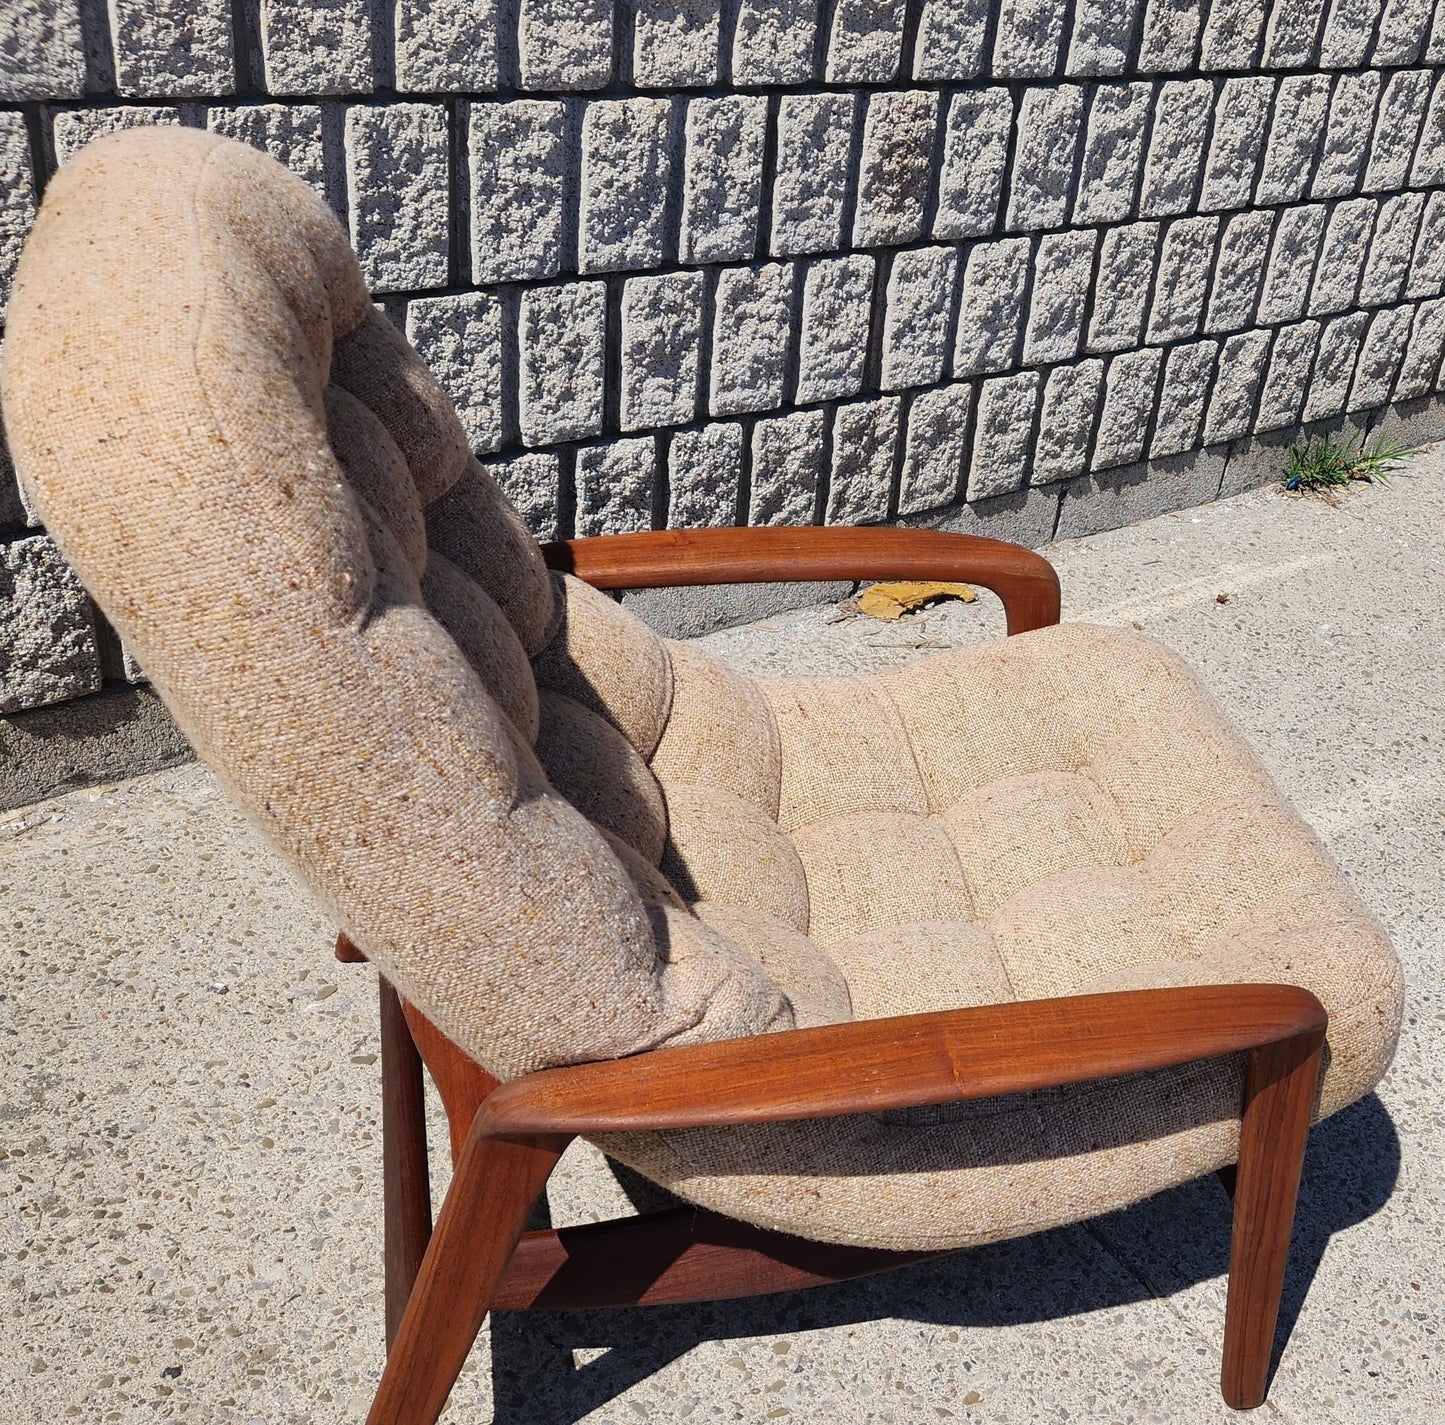 REFINISHED Mid Century Modern Teak Scoop Lounge Chair by R.Huber